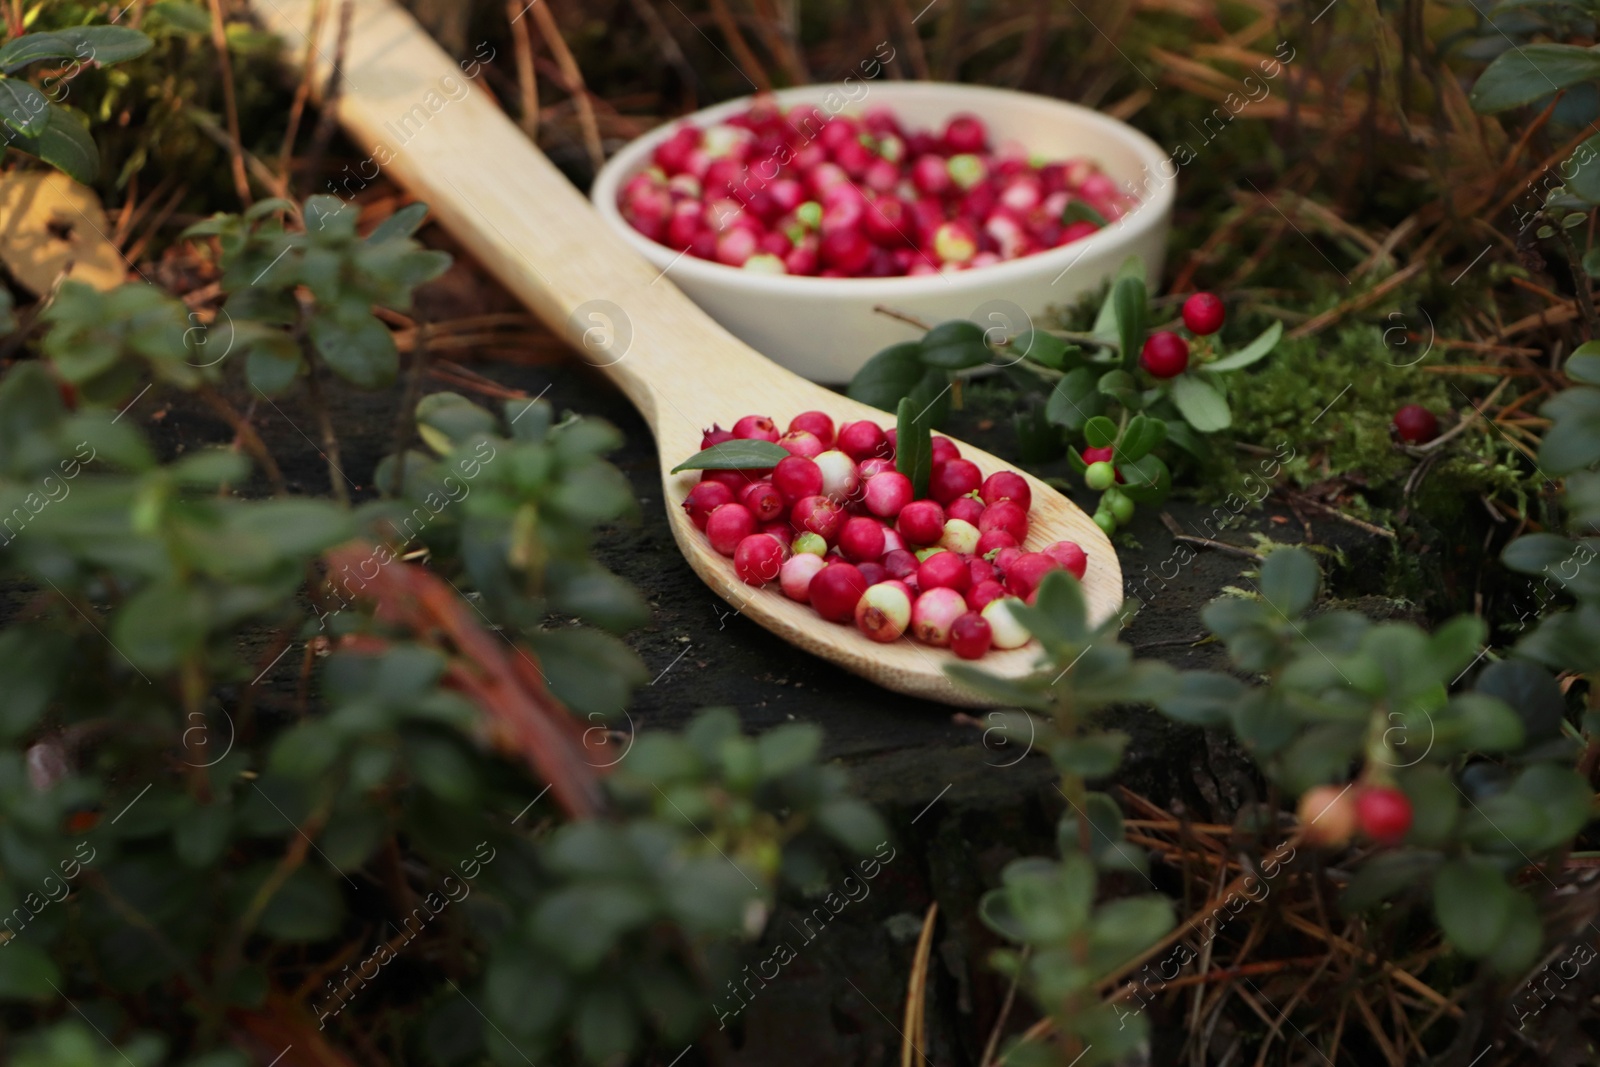 Photo of Delicious ripe red lingonberries in wooden spoon outdoors